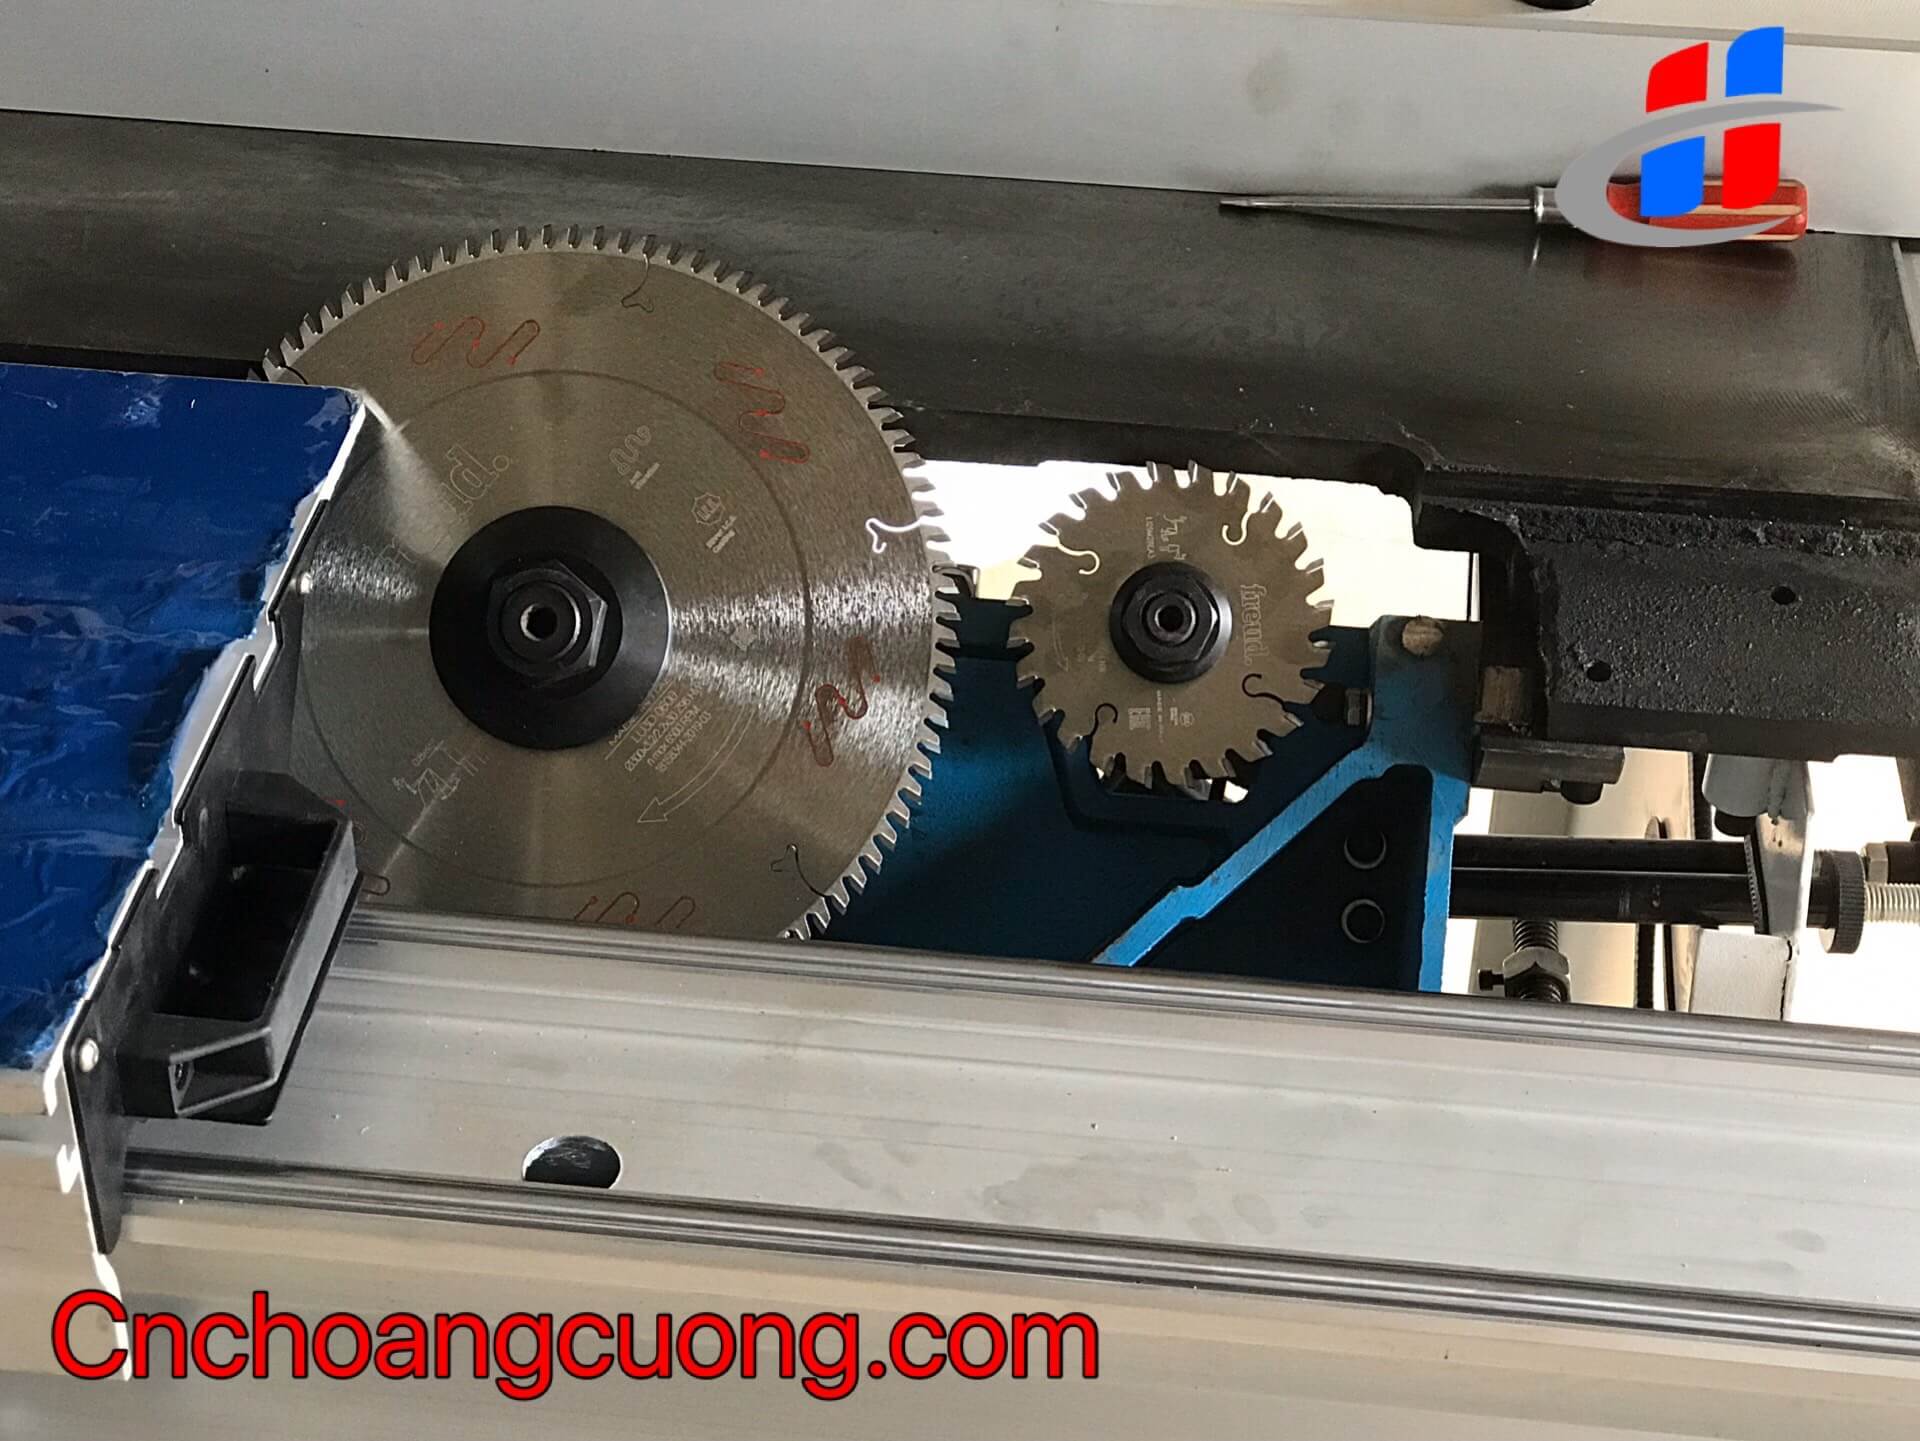 https://cnchoangcuong.com/?post_type=product&p=1835&preview=true